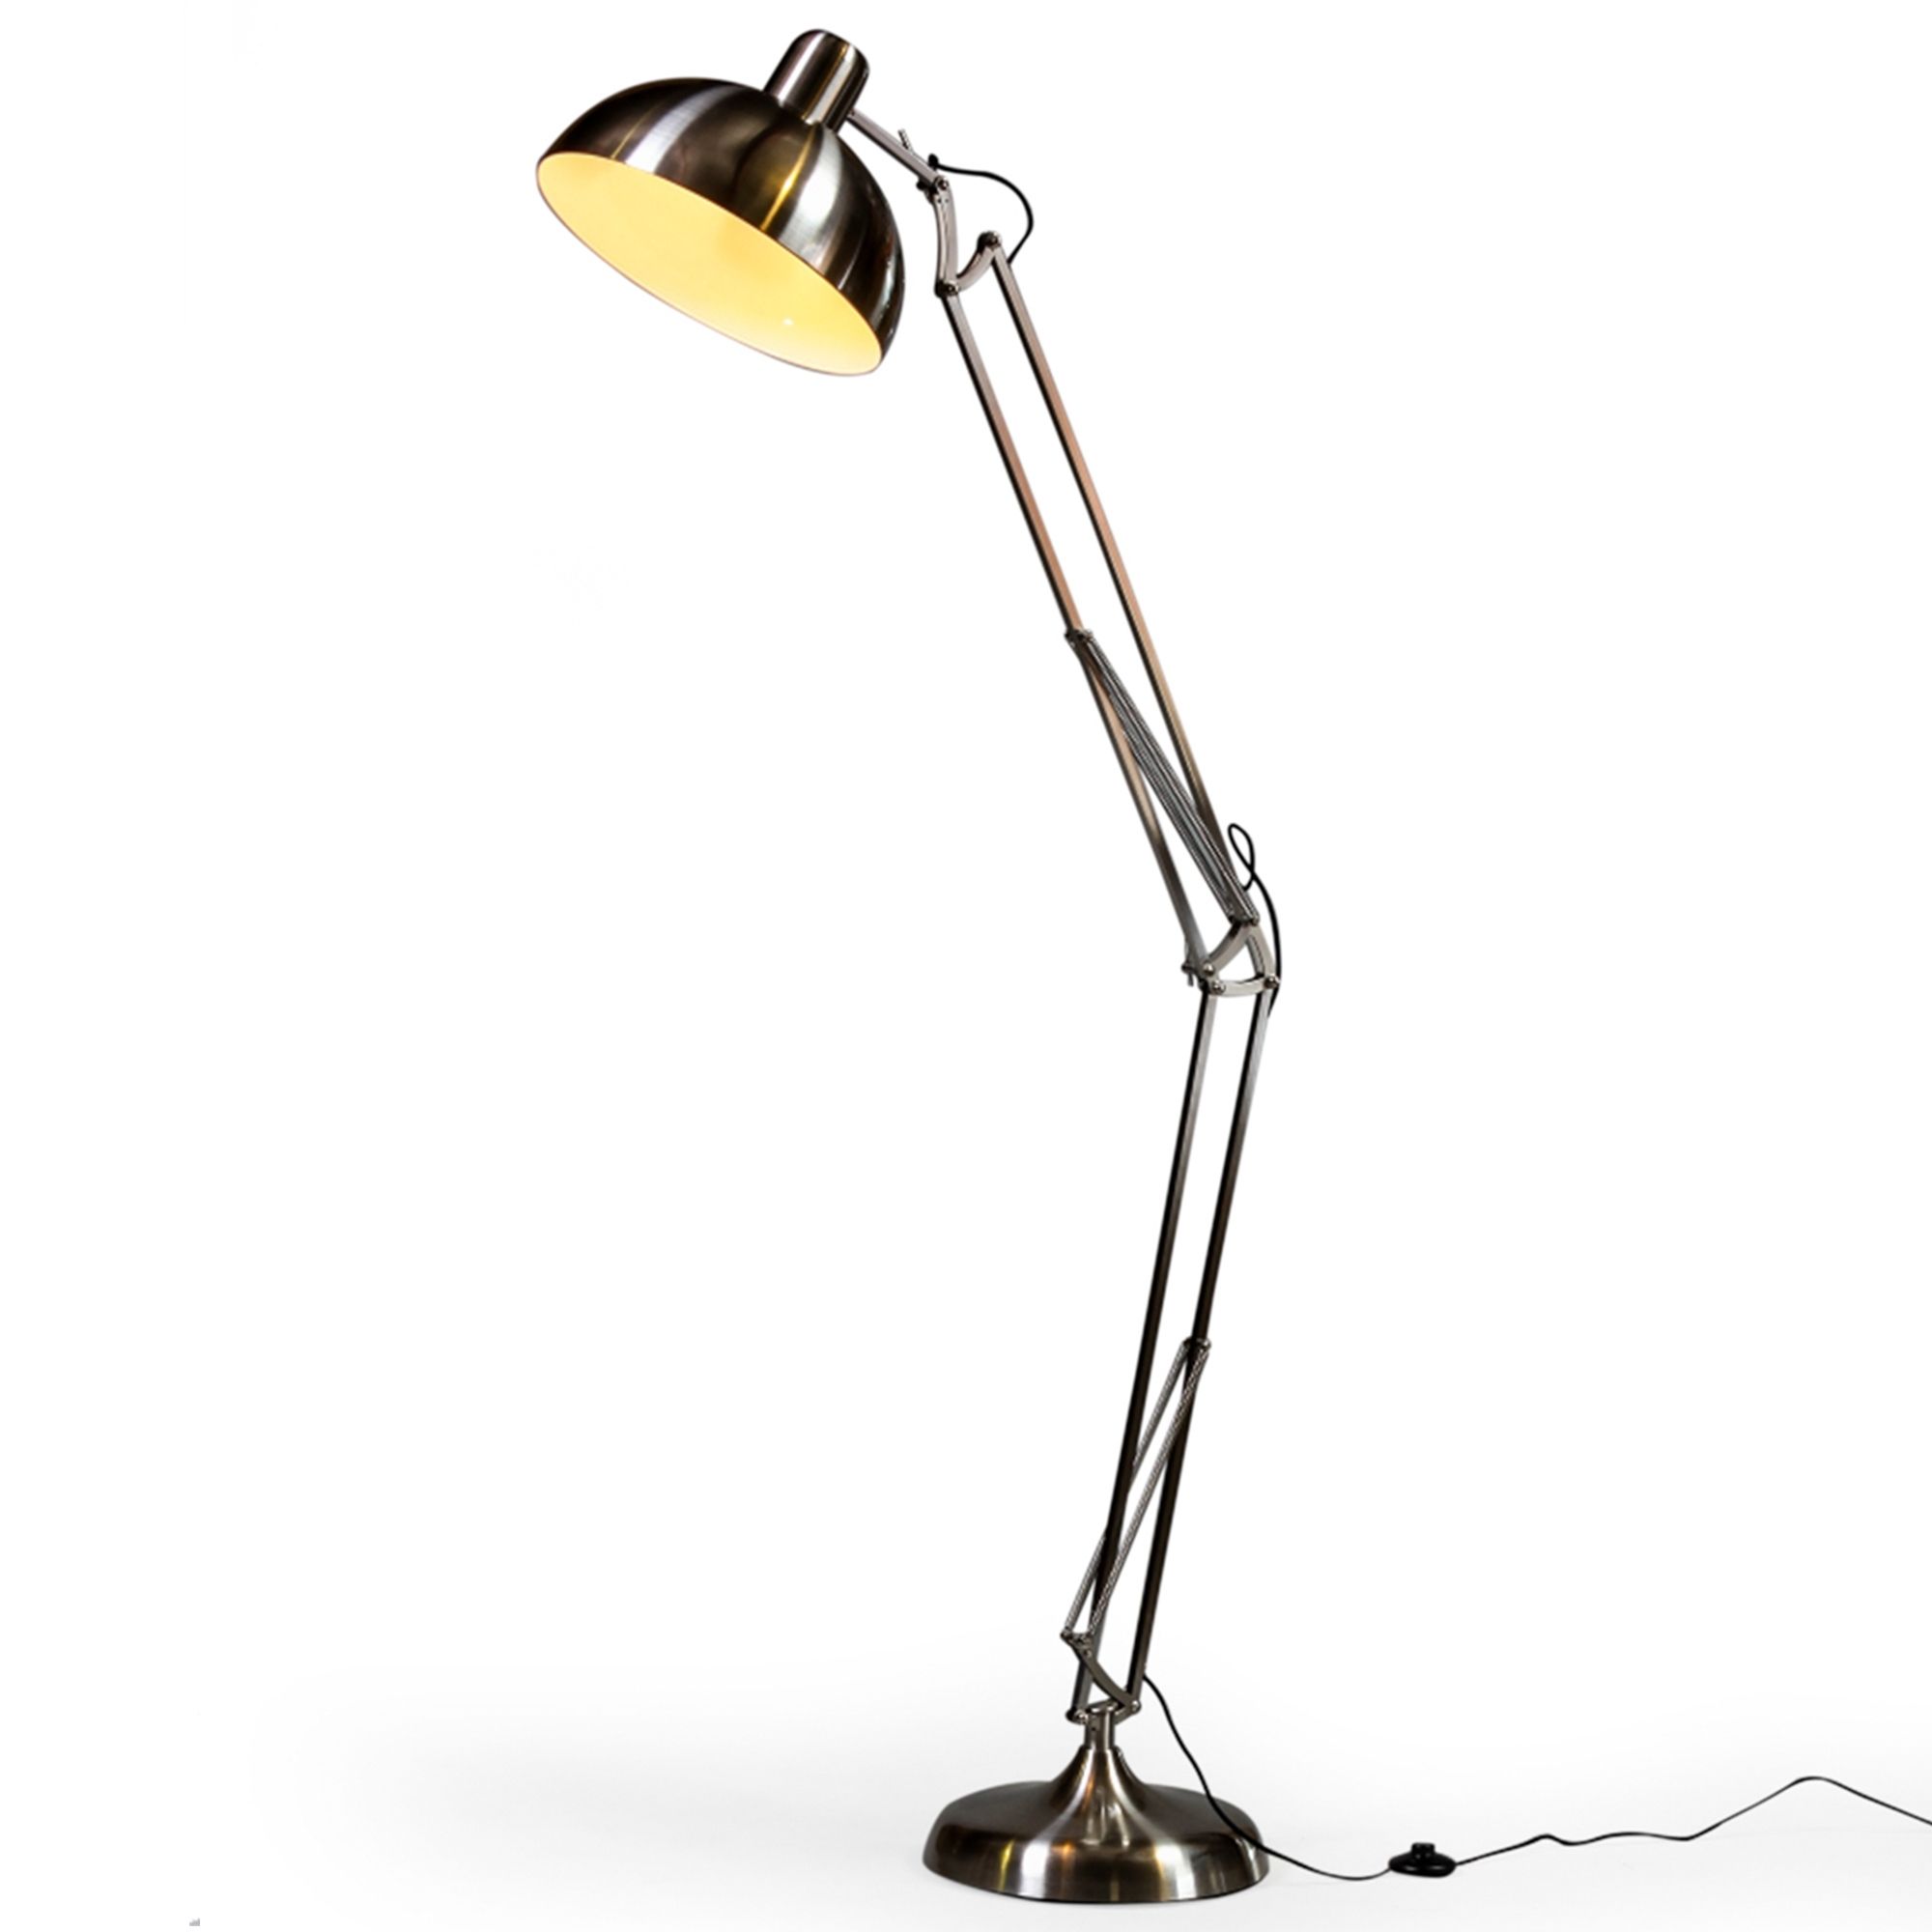 Brushed Steel Extra Large Classic Desk Style Floor Lamp | Floor Lamps For Brushed Steel Floor Lamps (View 12 of 15)